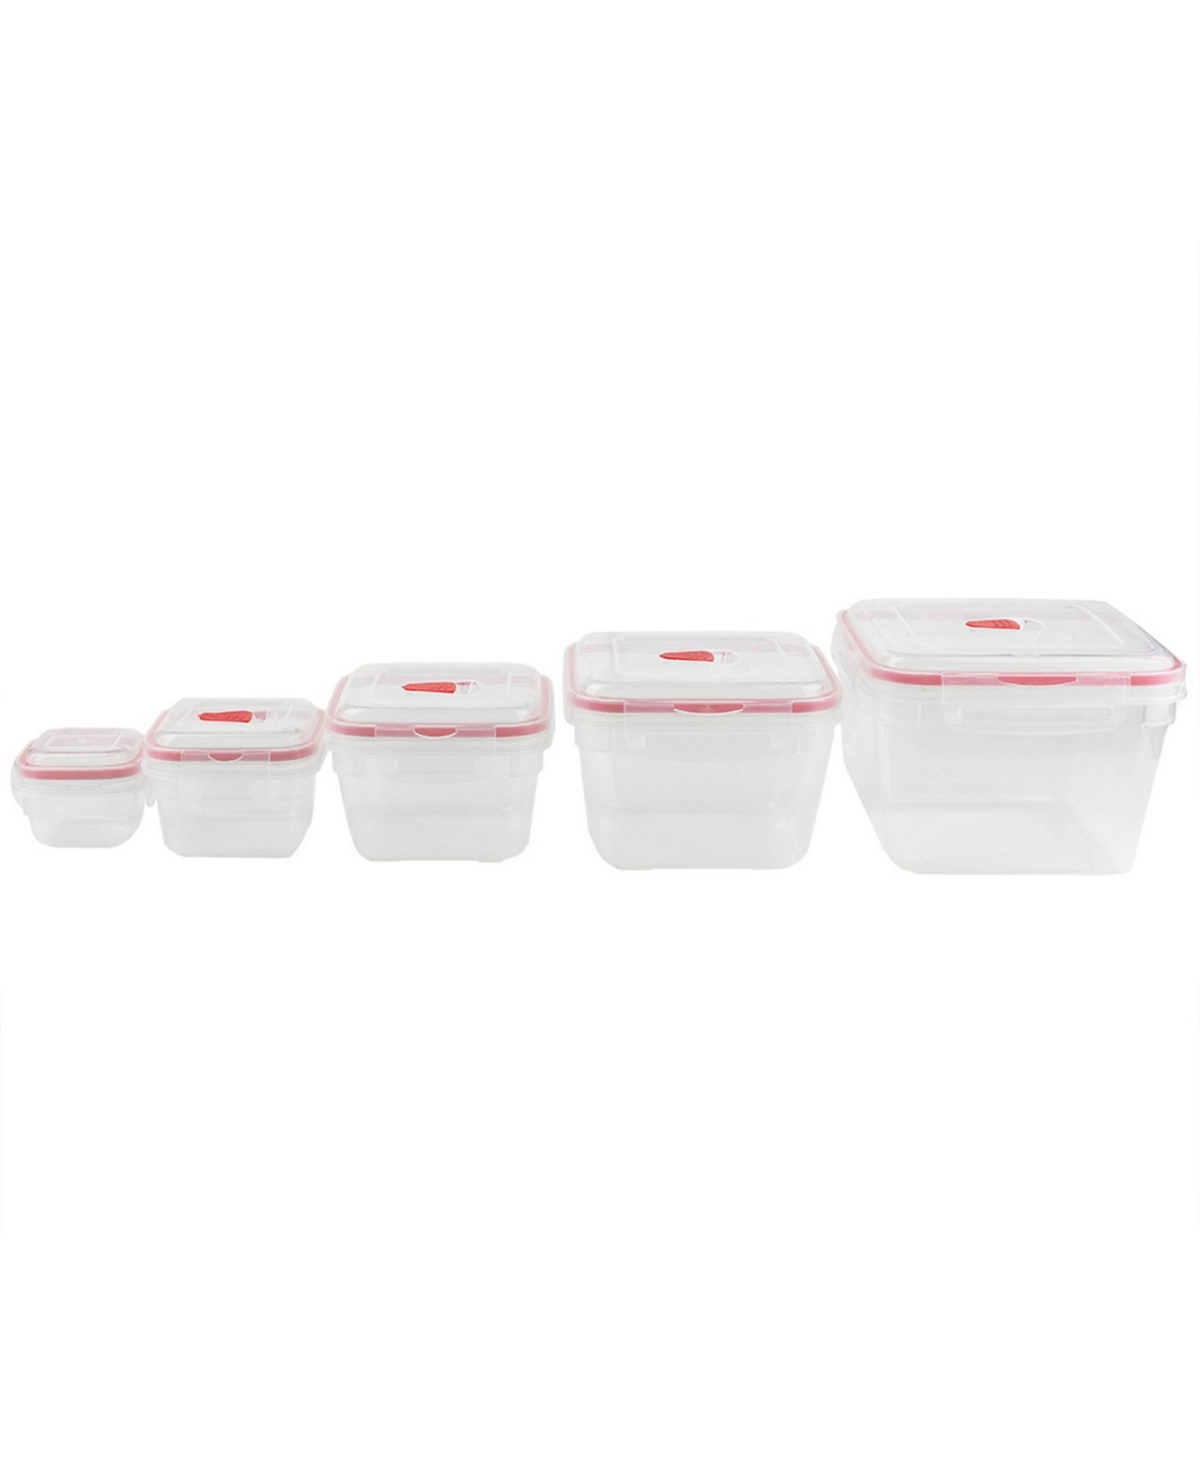 Hds Trading Locking Square Plastic Food Storage Containers with Ventilated Snap-On Lids - 10 Piece